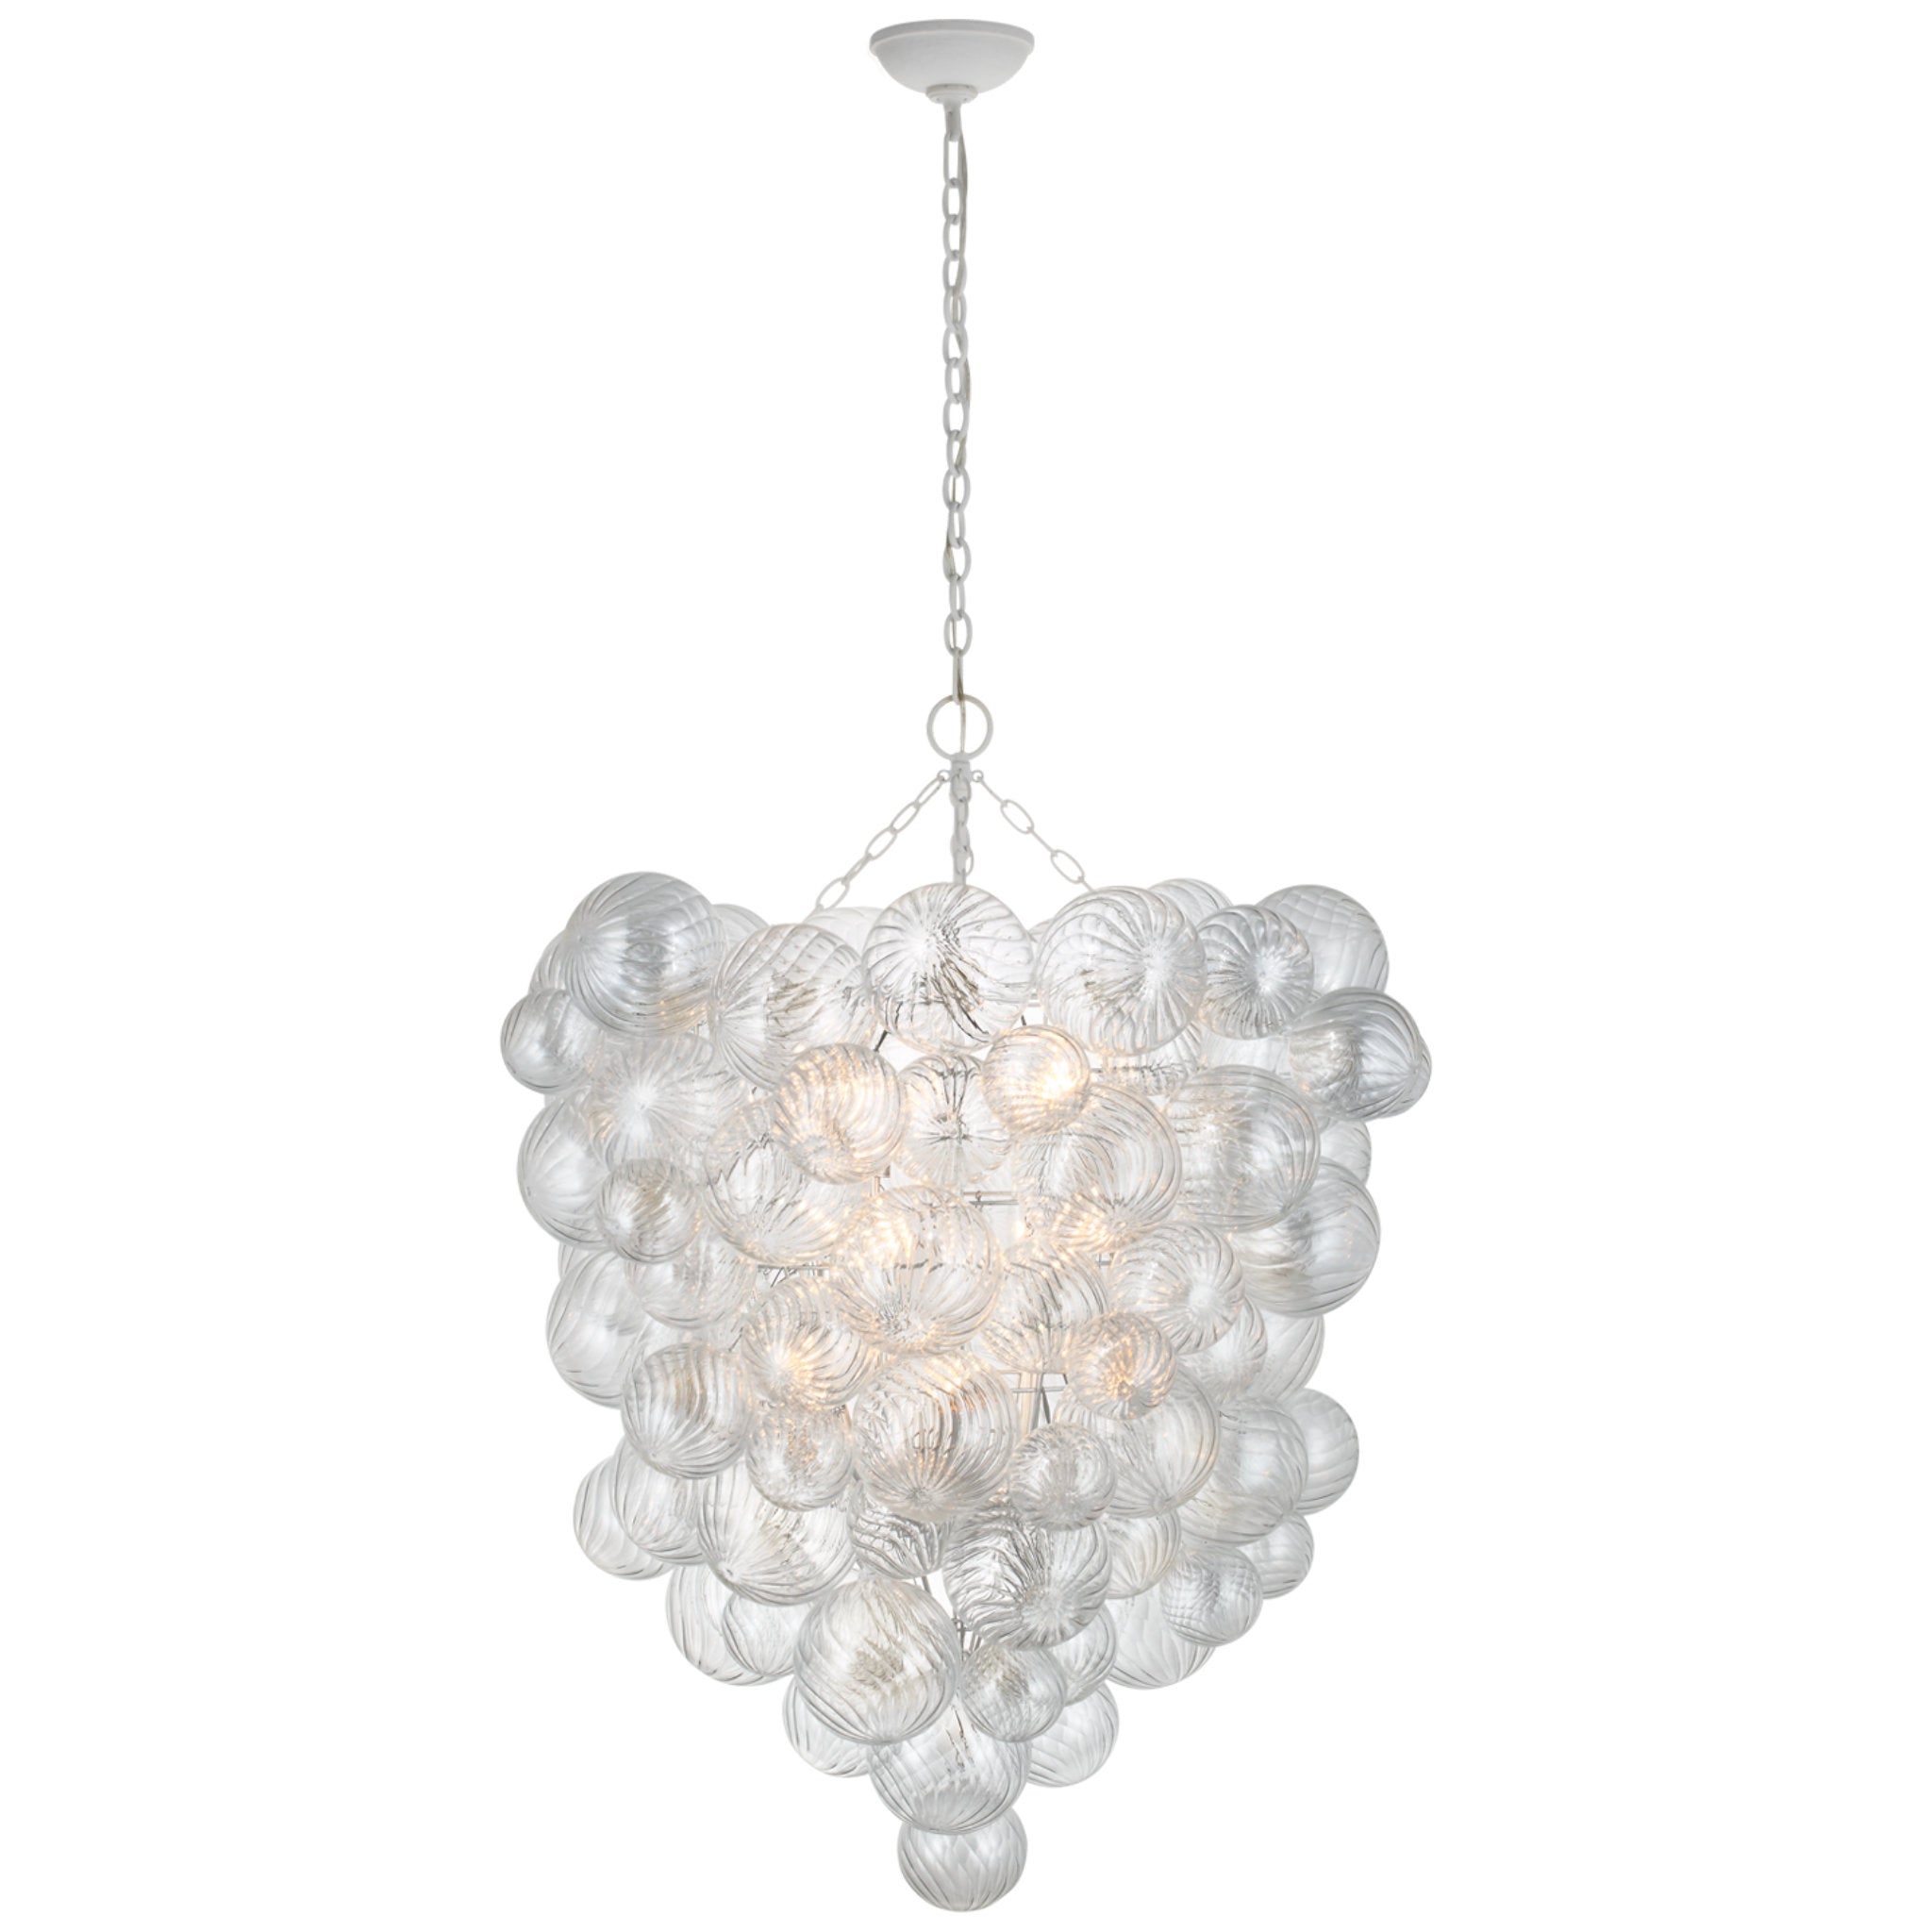 Julie Neill Talia Grande Entry Chandelier in Plaster White with Clear Swirled Glass